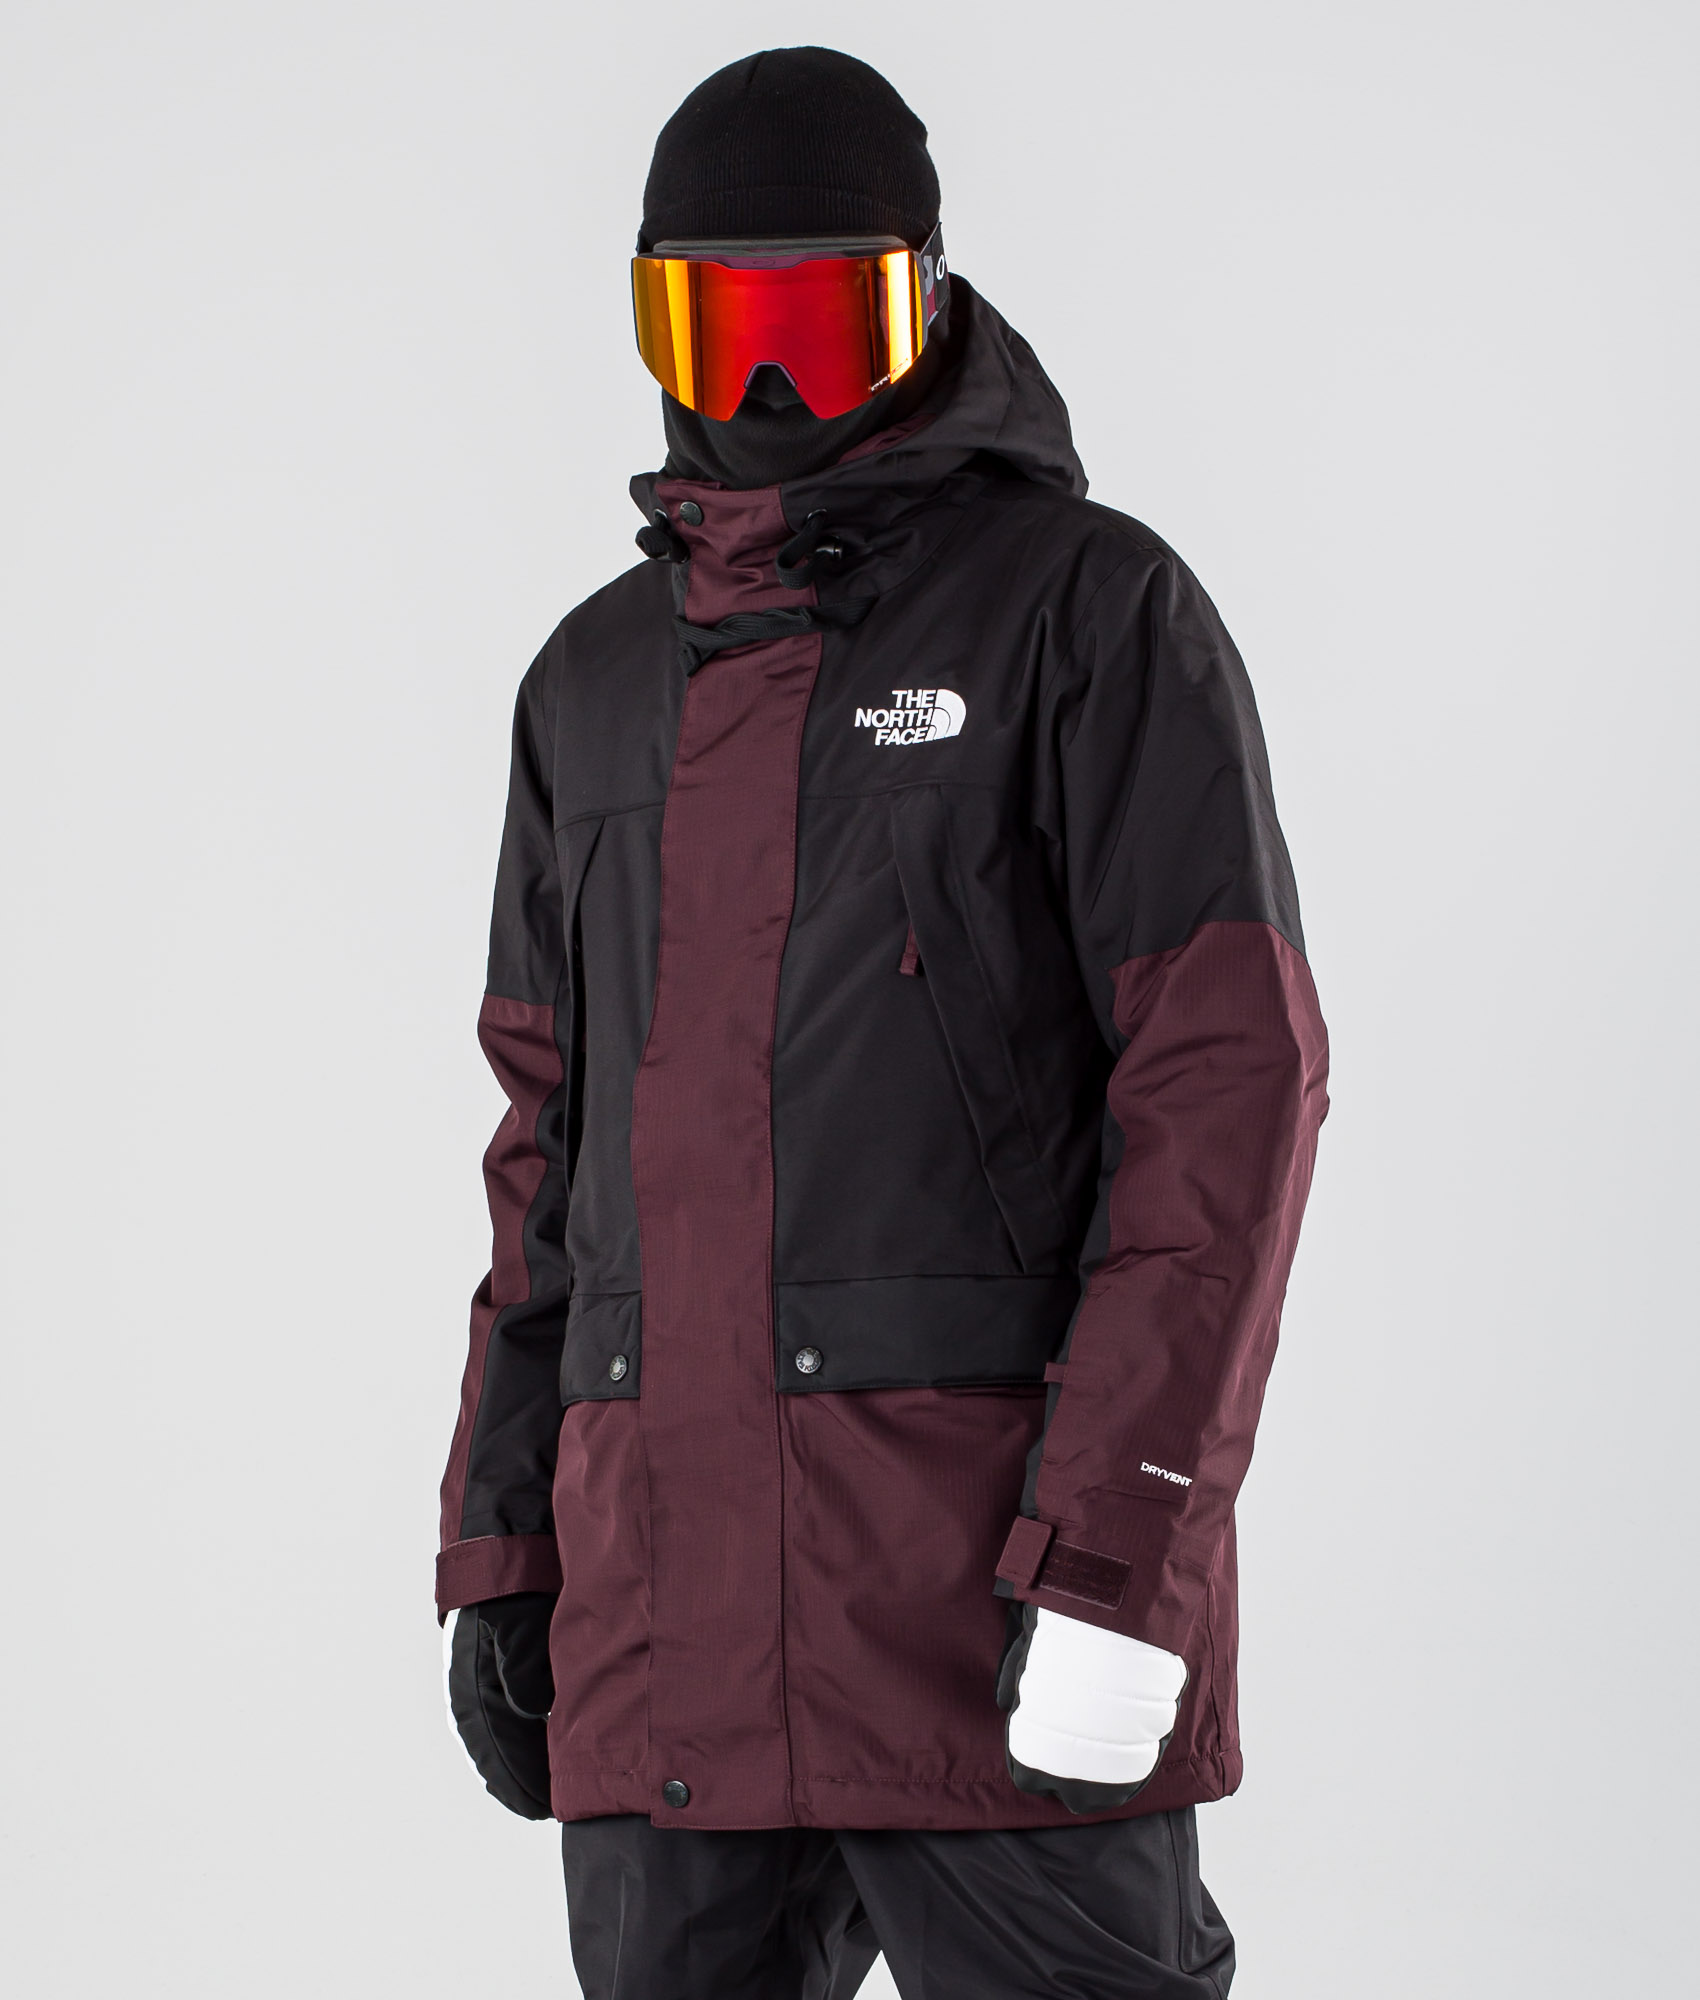 The North Face Goldmill Parka Snowboard 